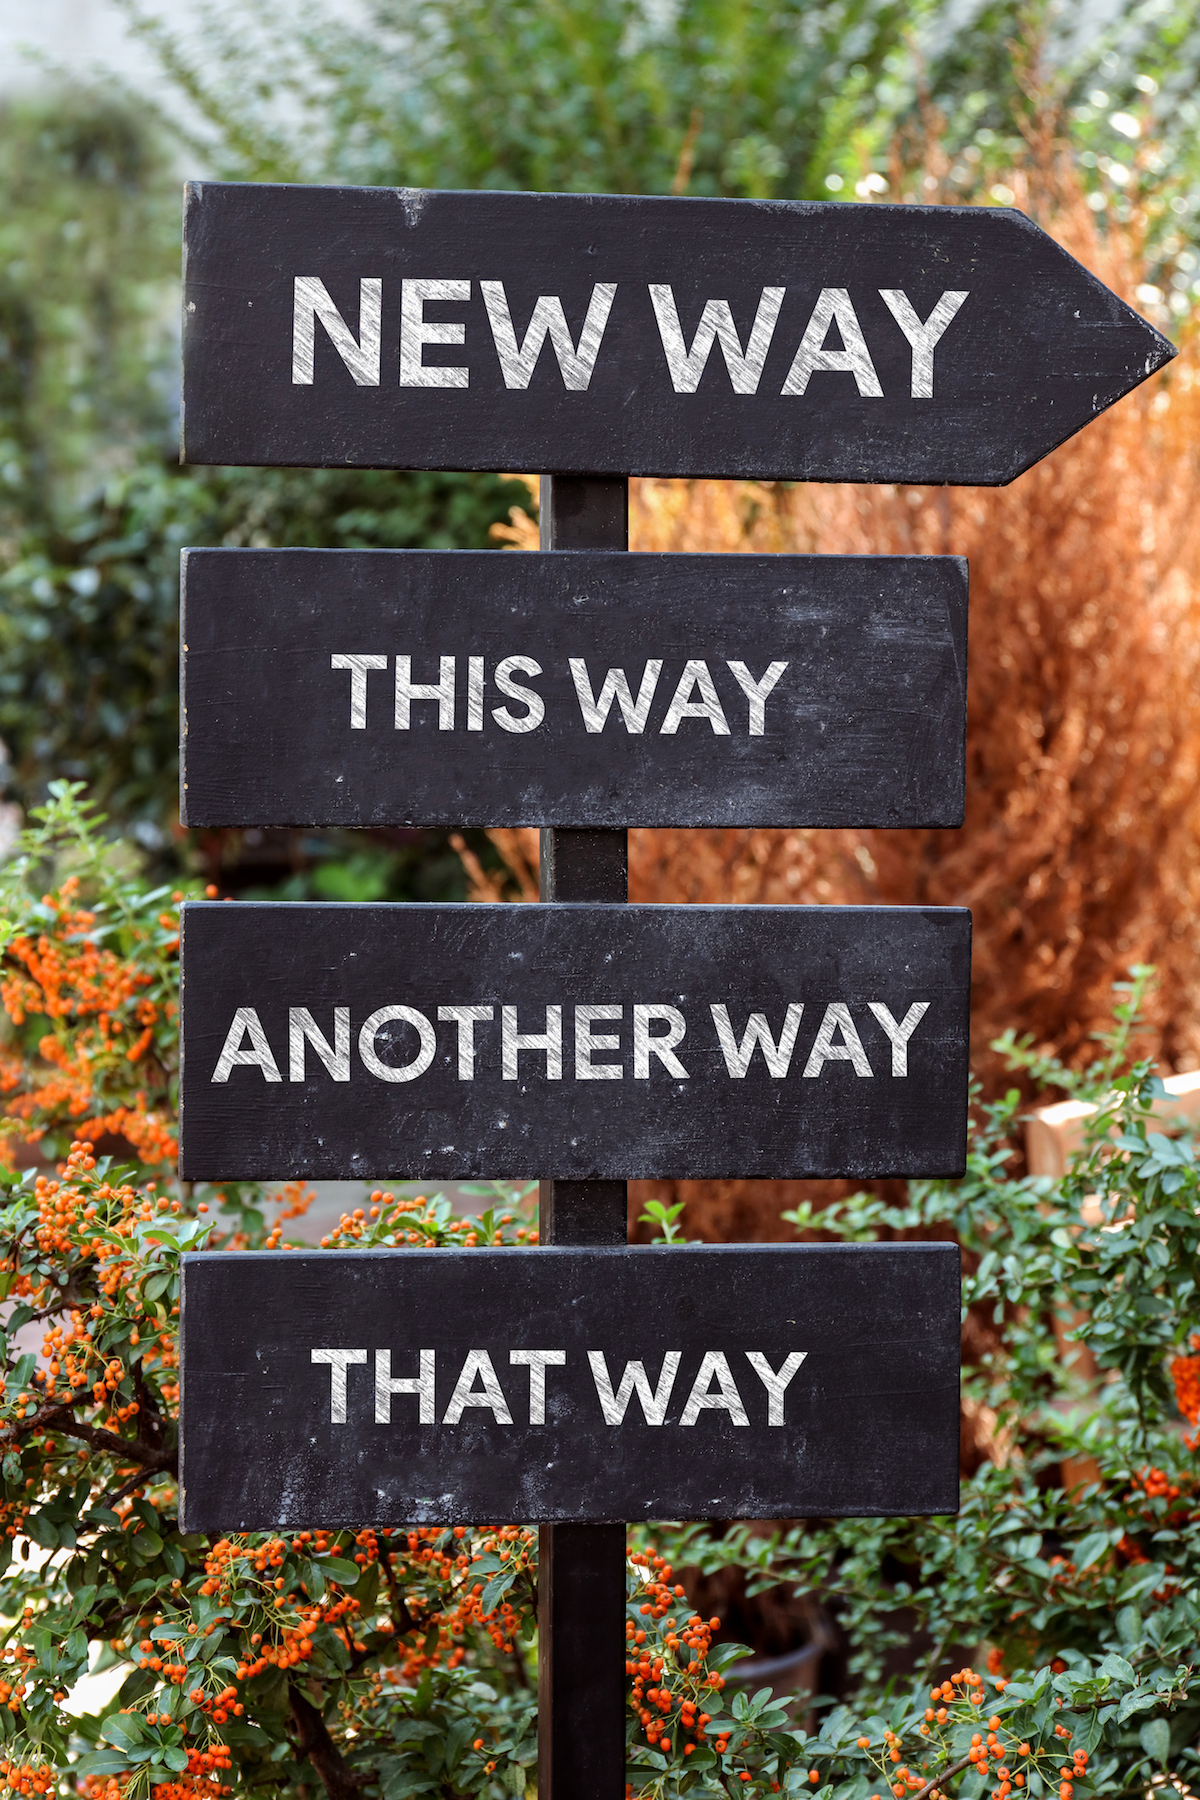 Signposts help your audience know where you are in your argument—where you're going—like this signpost image.